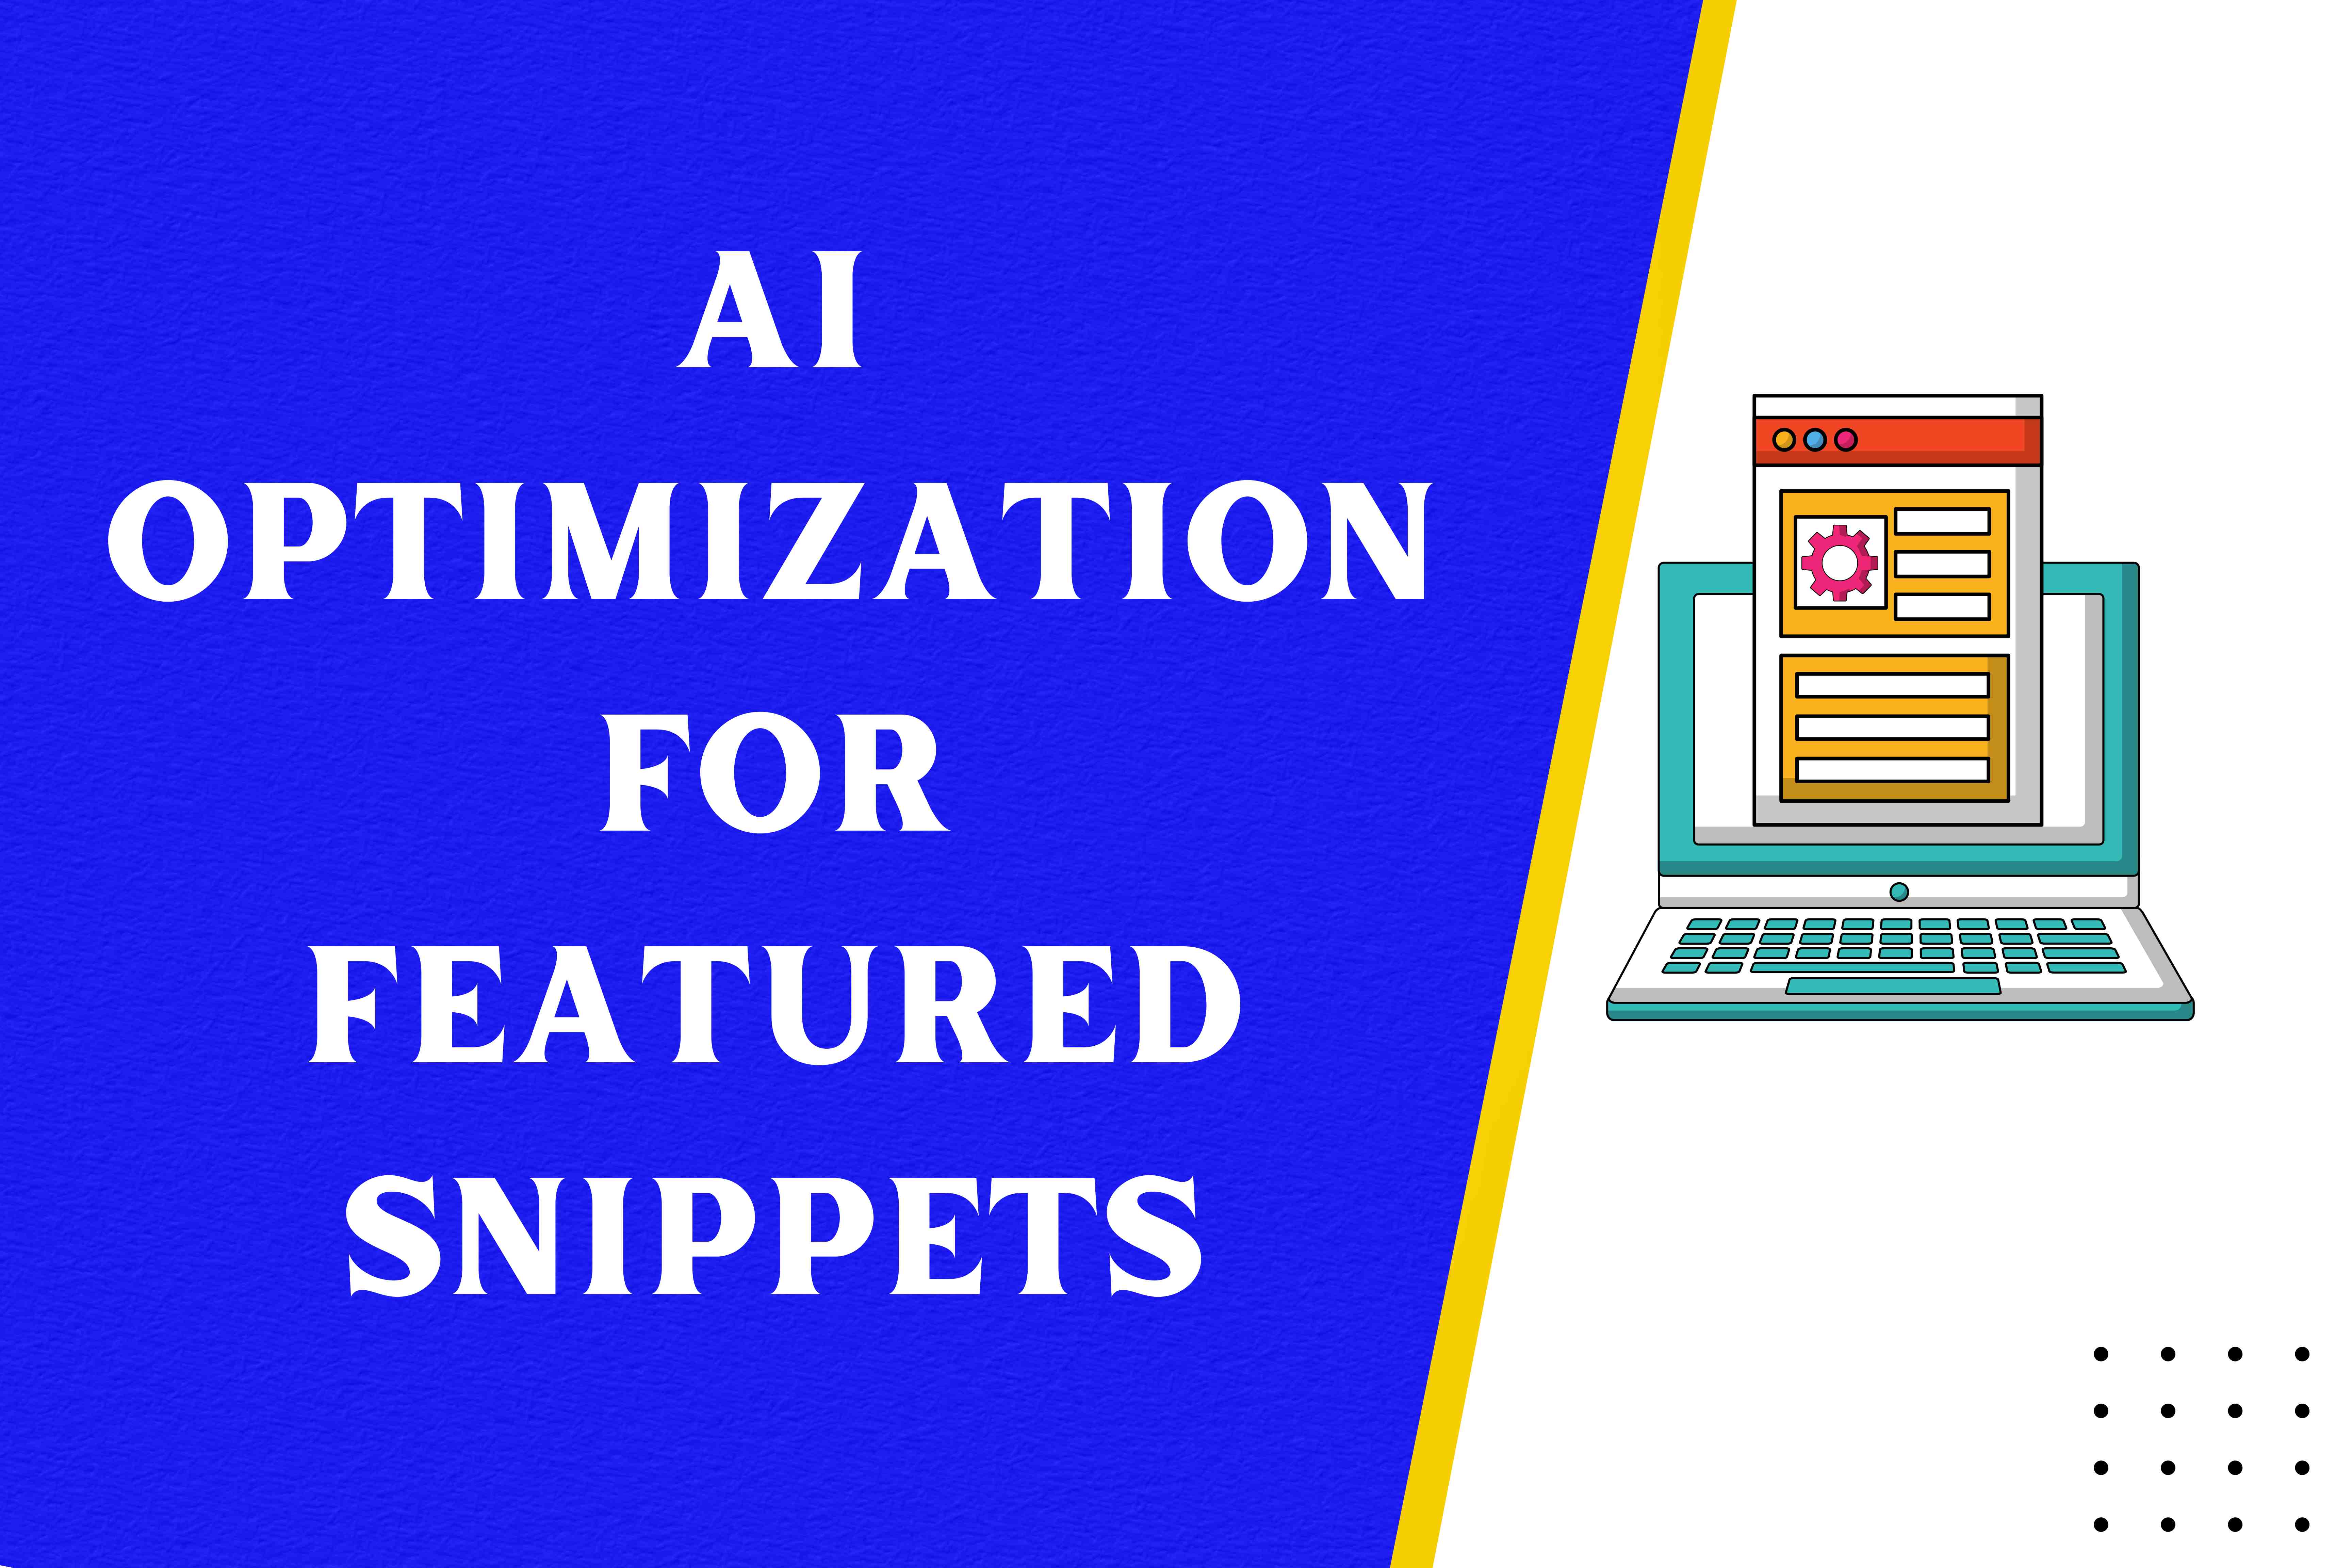 AI OPTIMIZATION FOR FEATURED SNIPPETS